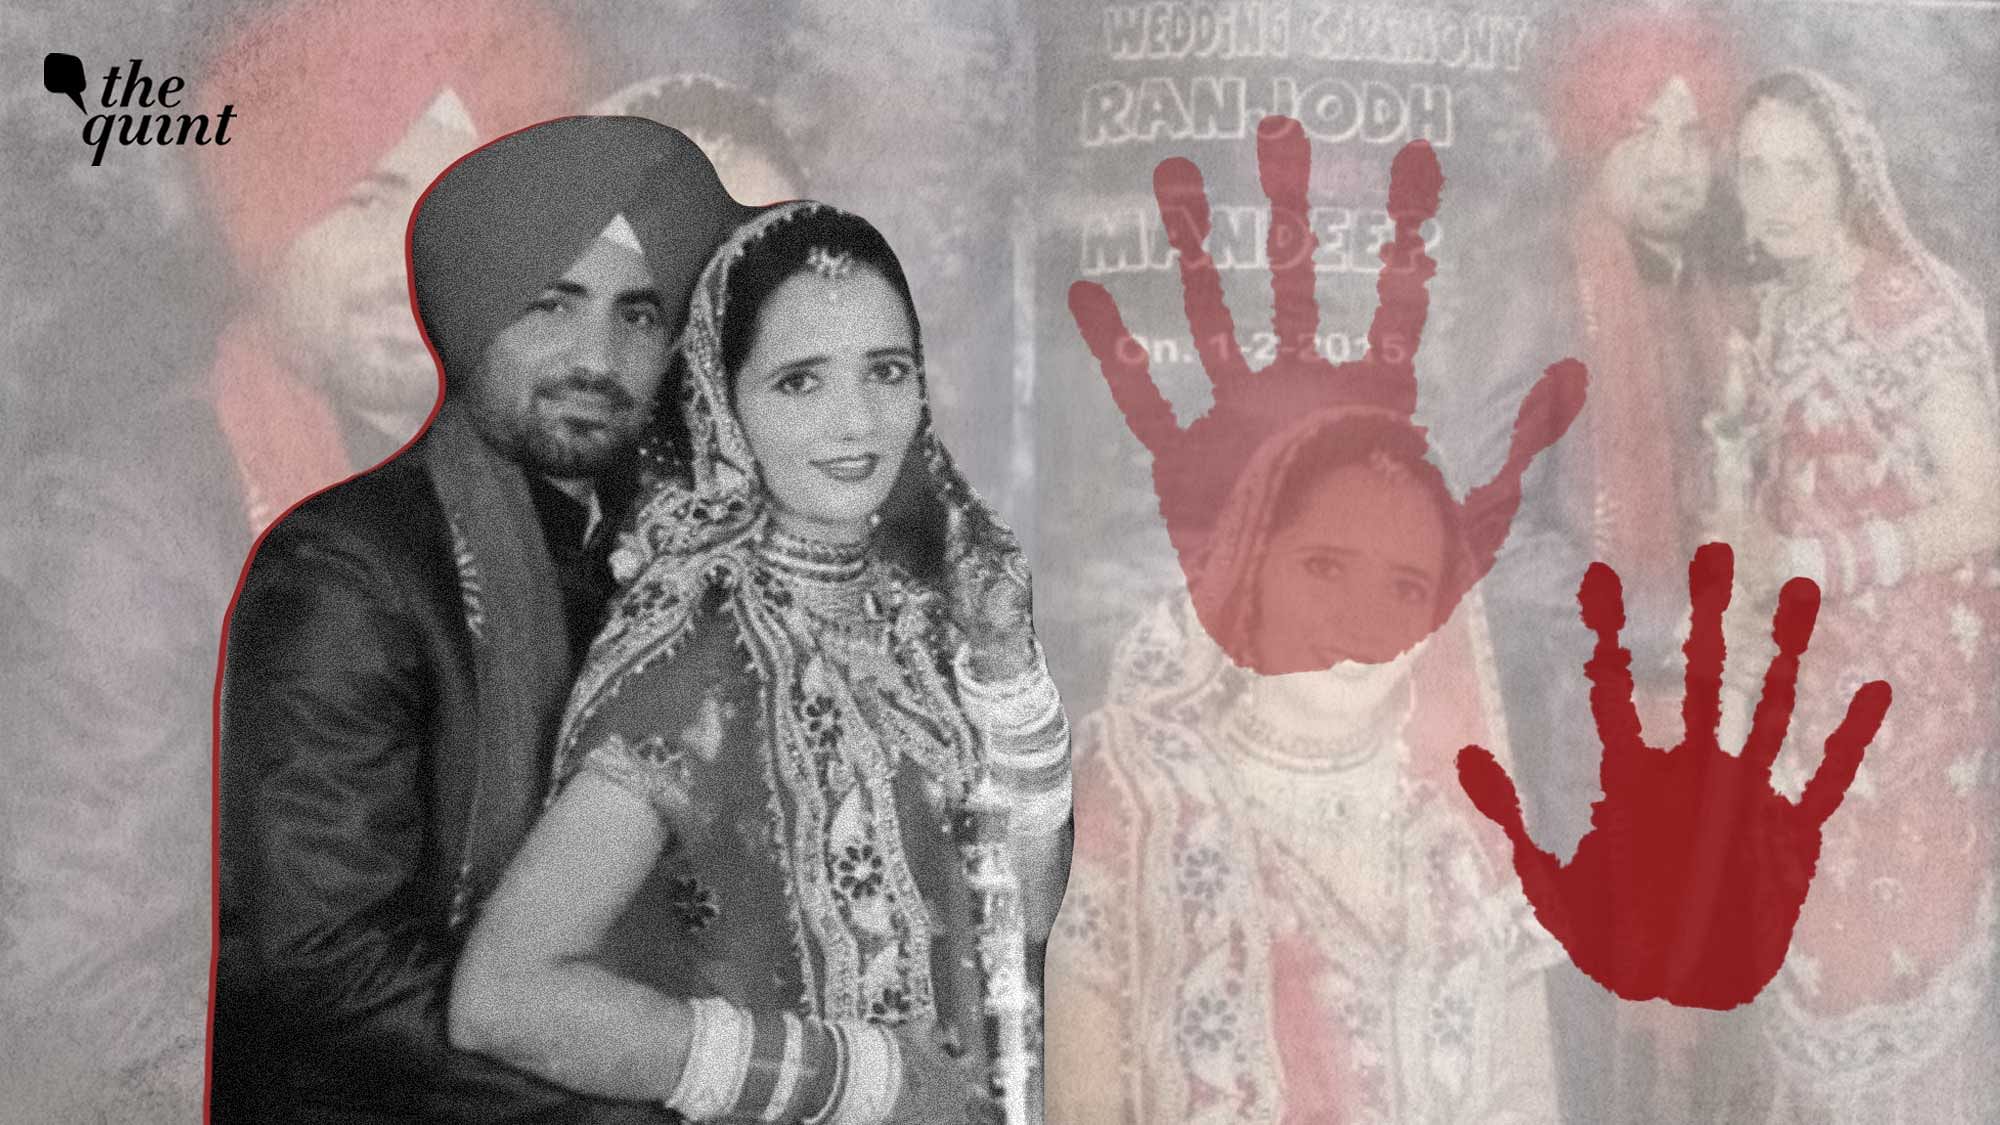 <div class="paragraphs"><p>On 4 August, the country woke up to the horrific news of Mandeep Kaur's death by <a href="https://www.thequint.com/neon/gender/indian-origin-mandeep-kaur-death-by-suicide-domestic-abuse-new-york#read-more">suicide</a> in <a href="https://www.thequint.com/topic/new-york">New York</a> following years of <a href="https://www.thequint.com/neon/gender/domestic-violence-in-india-women-share-stories">domestic abuse</a>.</p></div>